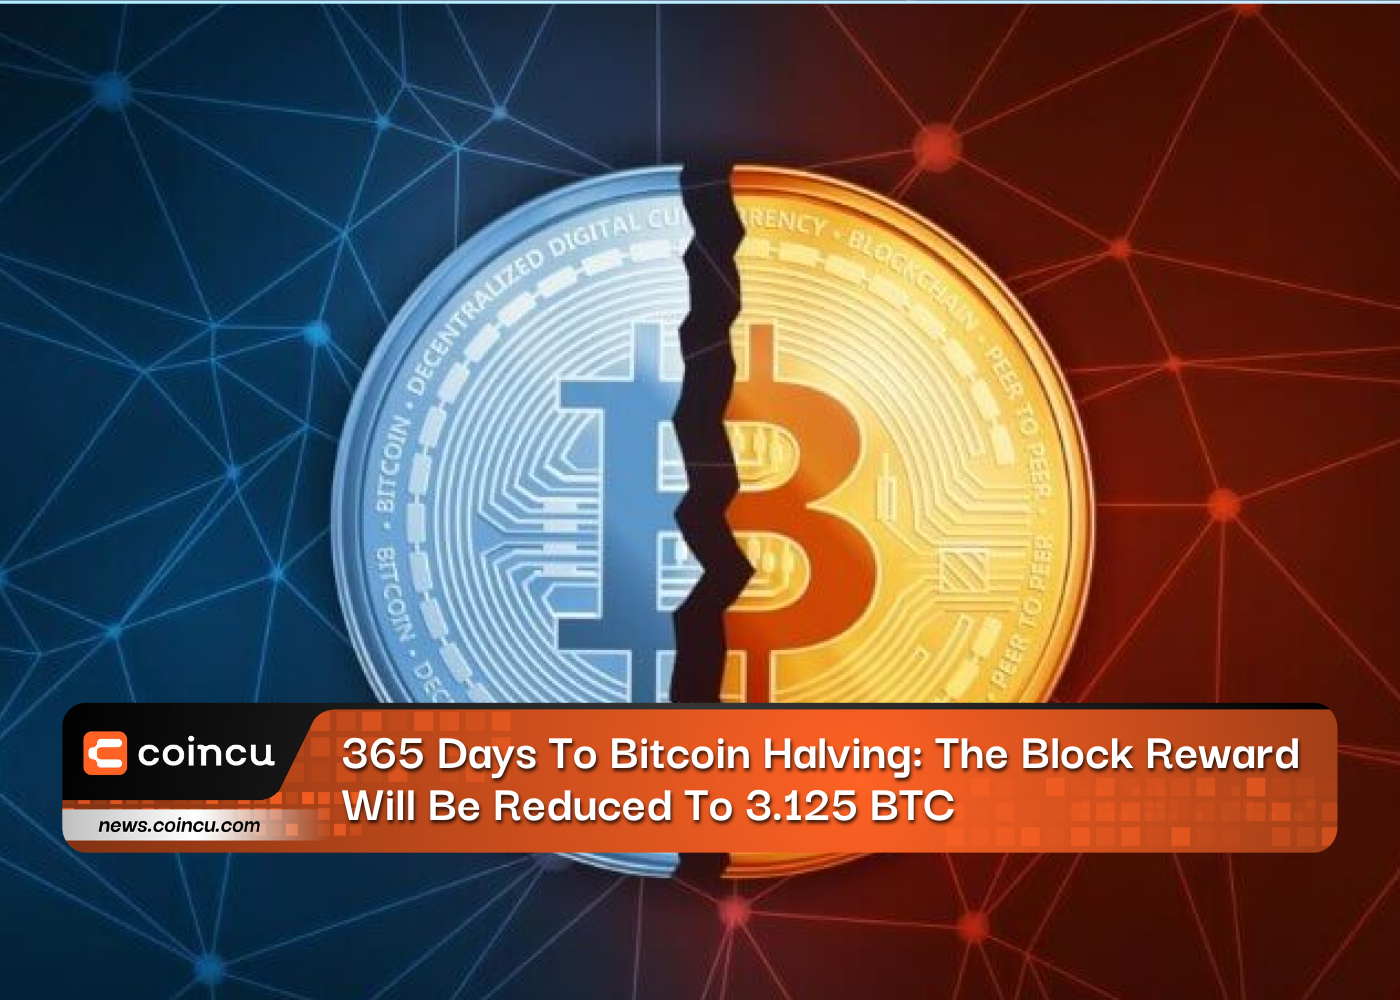 365 Days To Bitcoin Halving: The Block Reward Will Be Reduced To 3.125 BTC